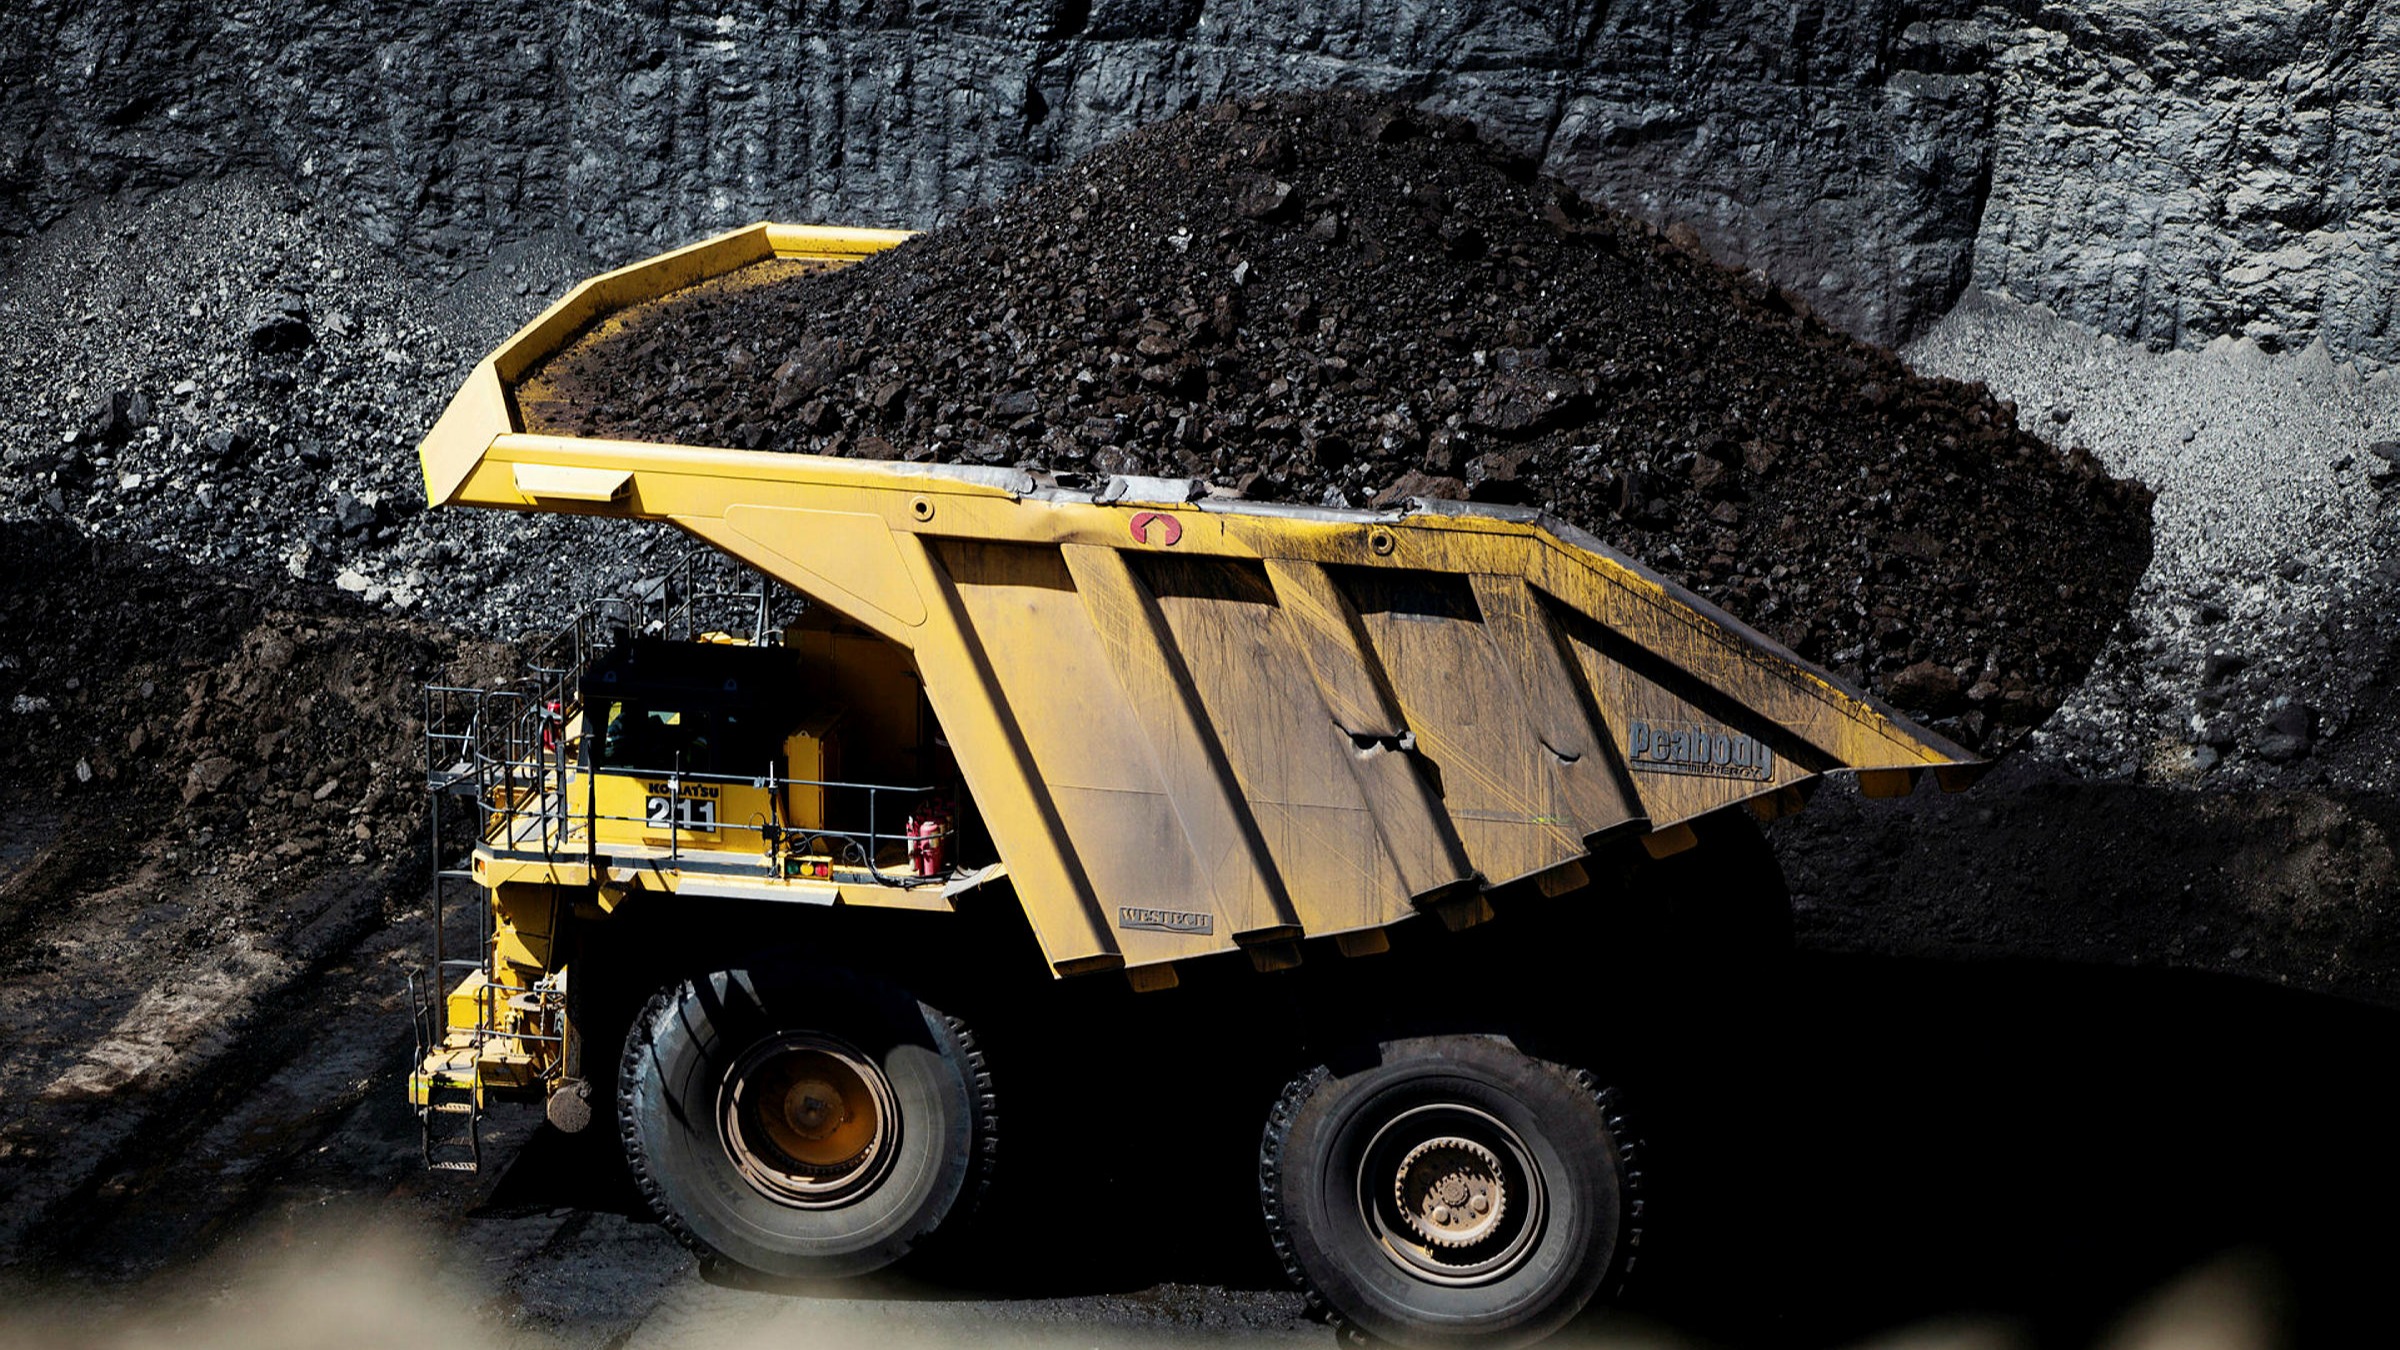 Value of world's largest coal mine slashed by $1.4bn | Financial Times